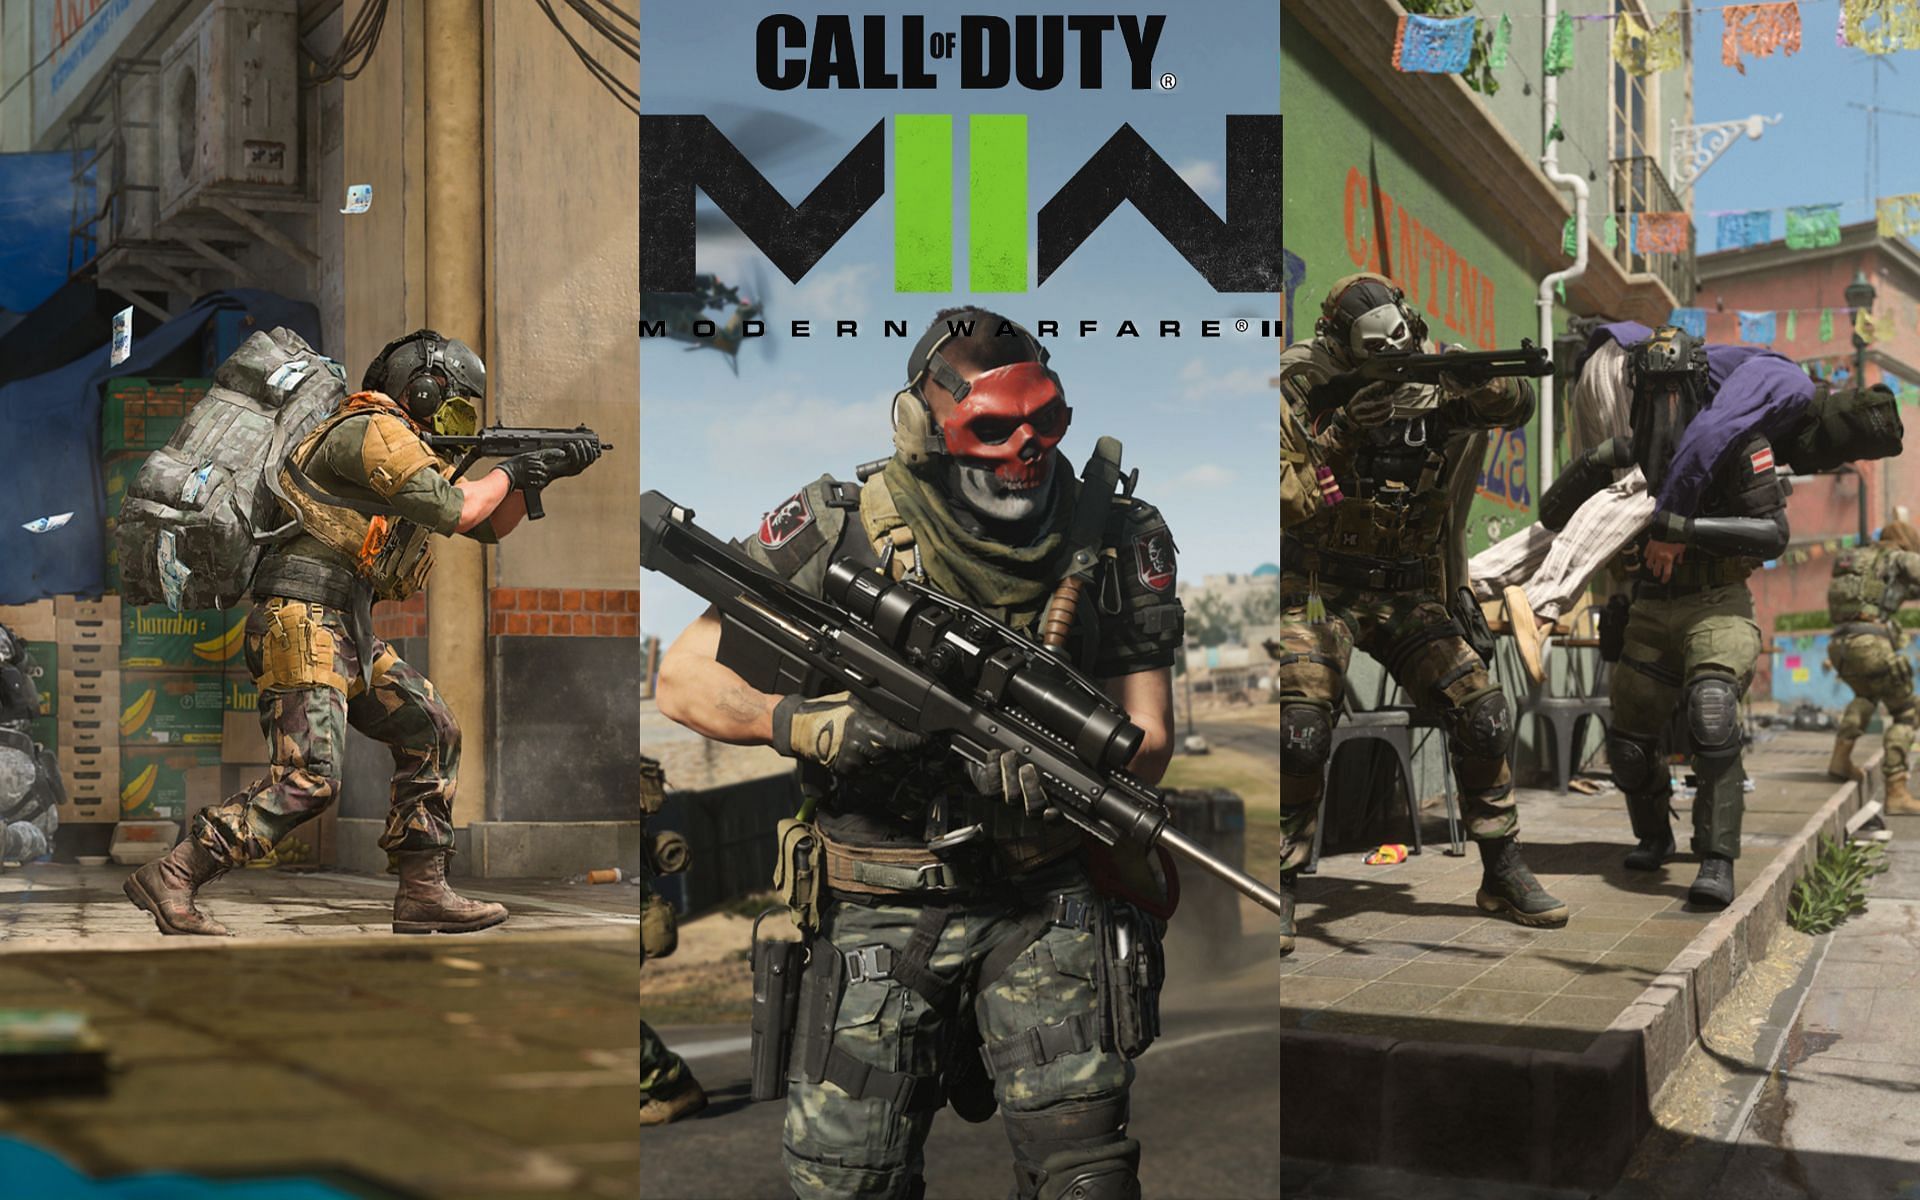 All new game modes coming to Modern Warfare 2 at launch